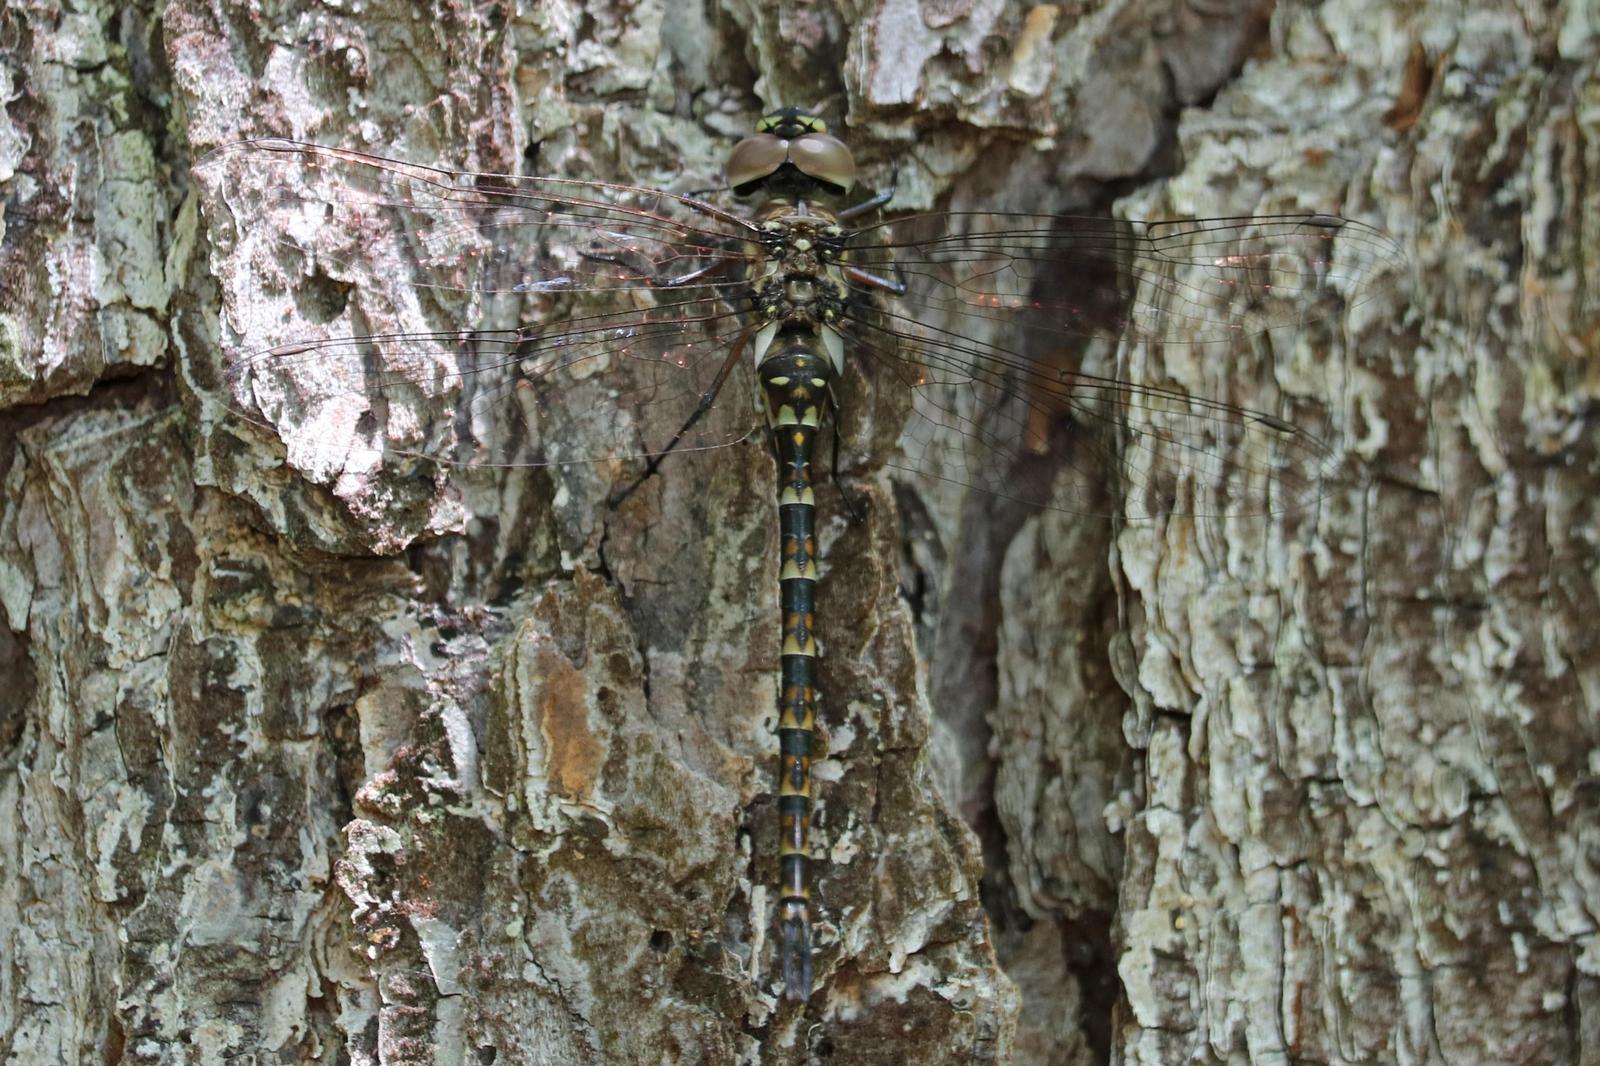 Taper-tailed Darner Photo by Kristy Baker